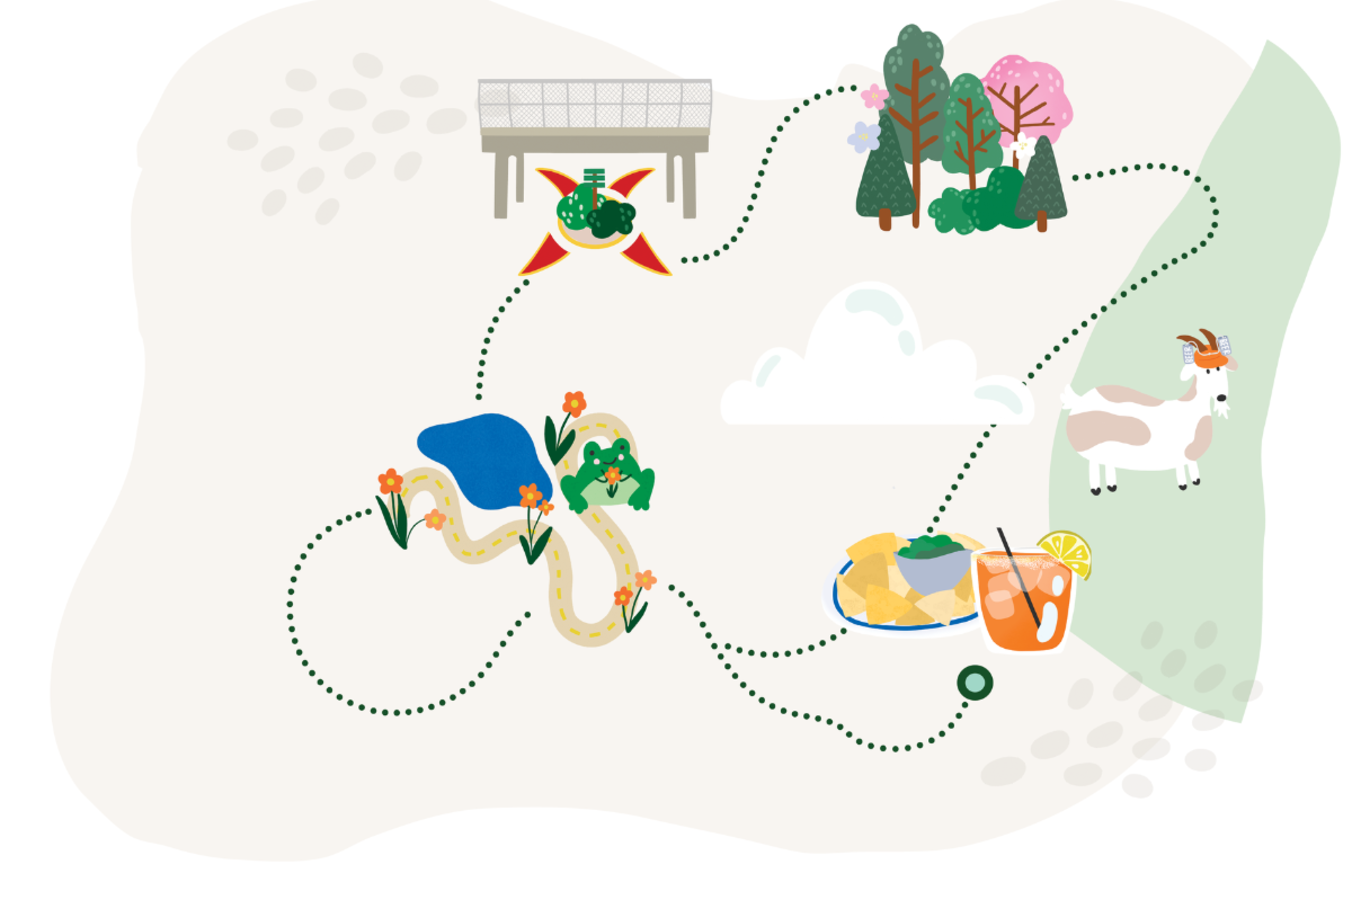 An illustrated graphic showing a bike trail with icons along the way of a goat, park, chips and salsa and a conservancy.